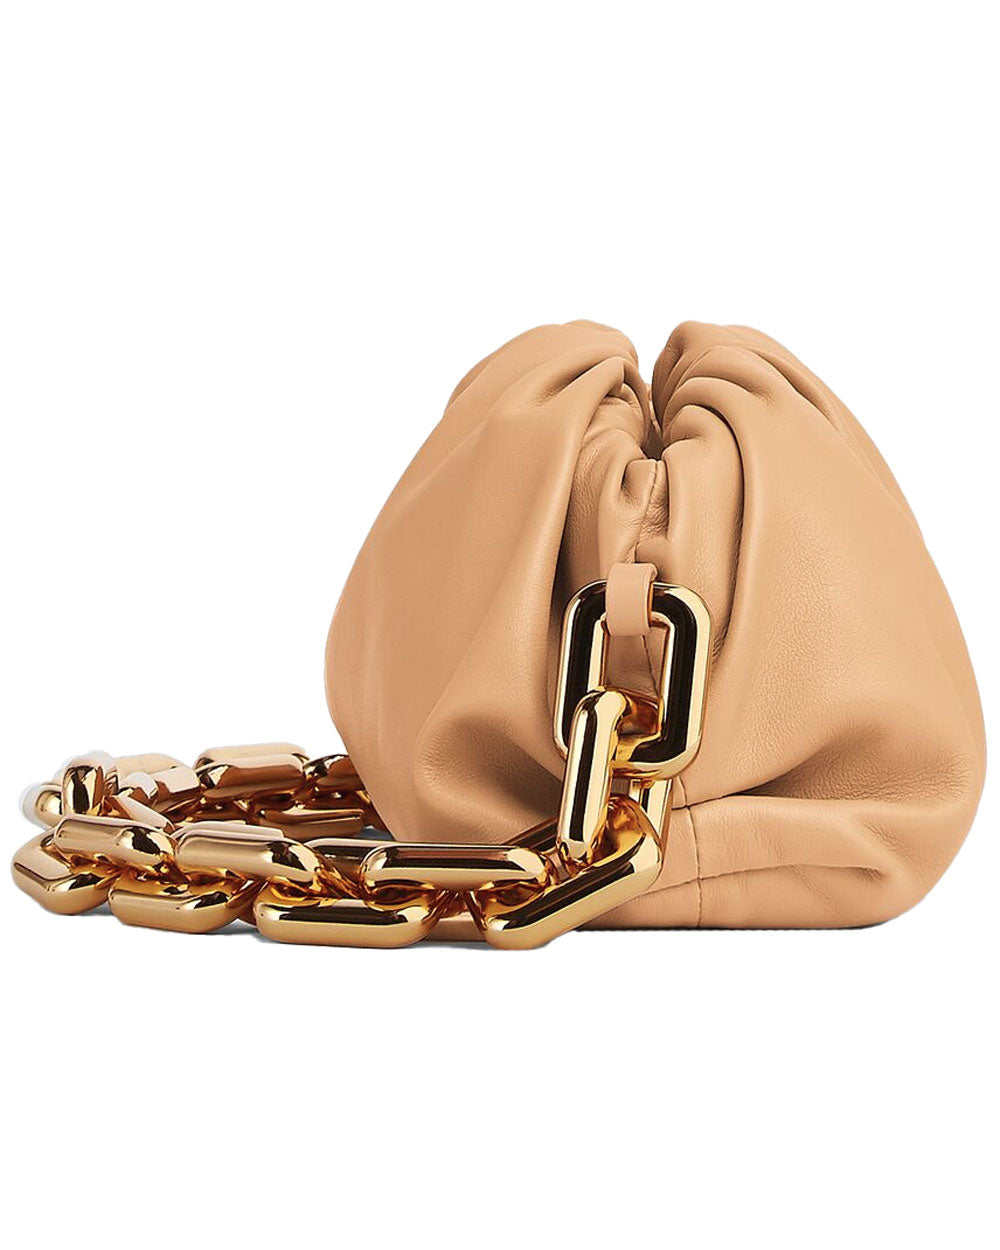 Teen Chain Pouch in Almond